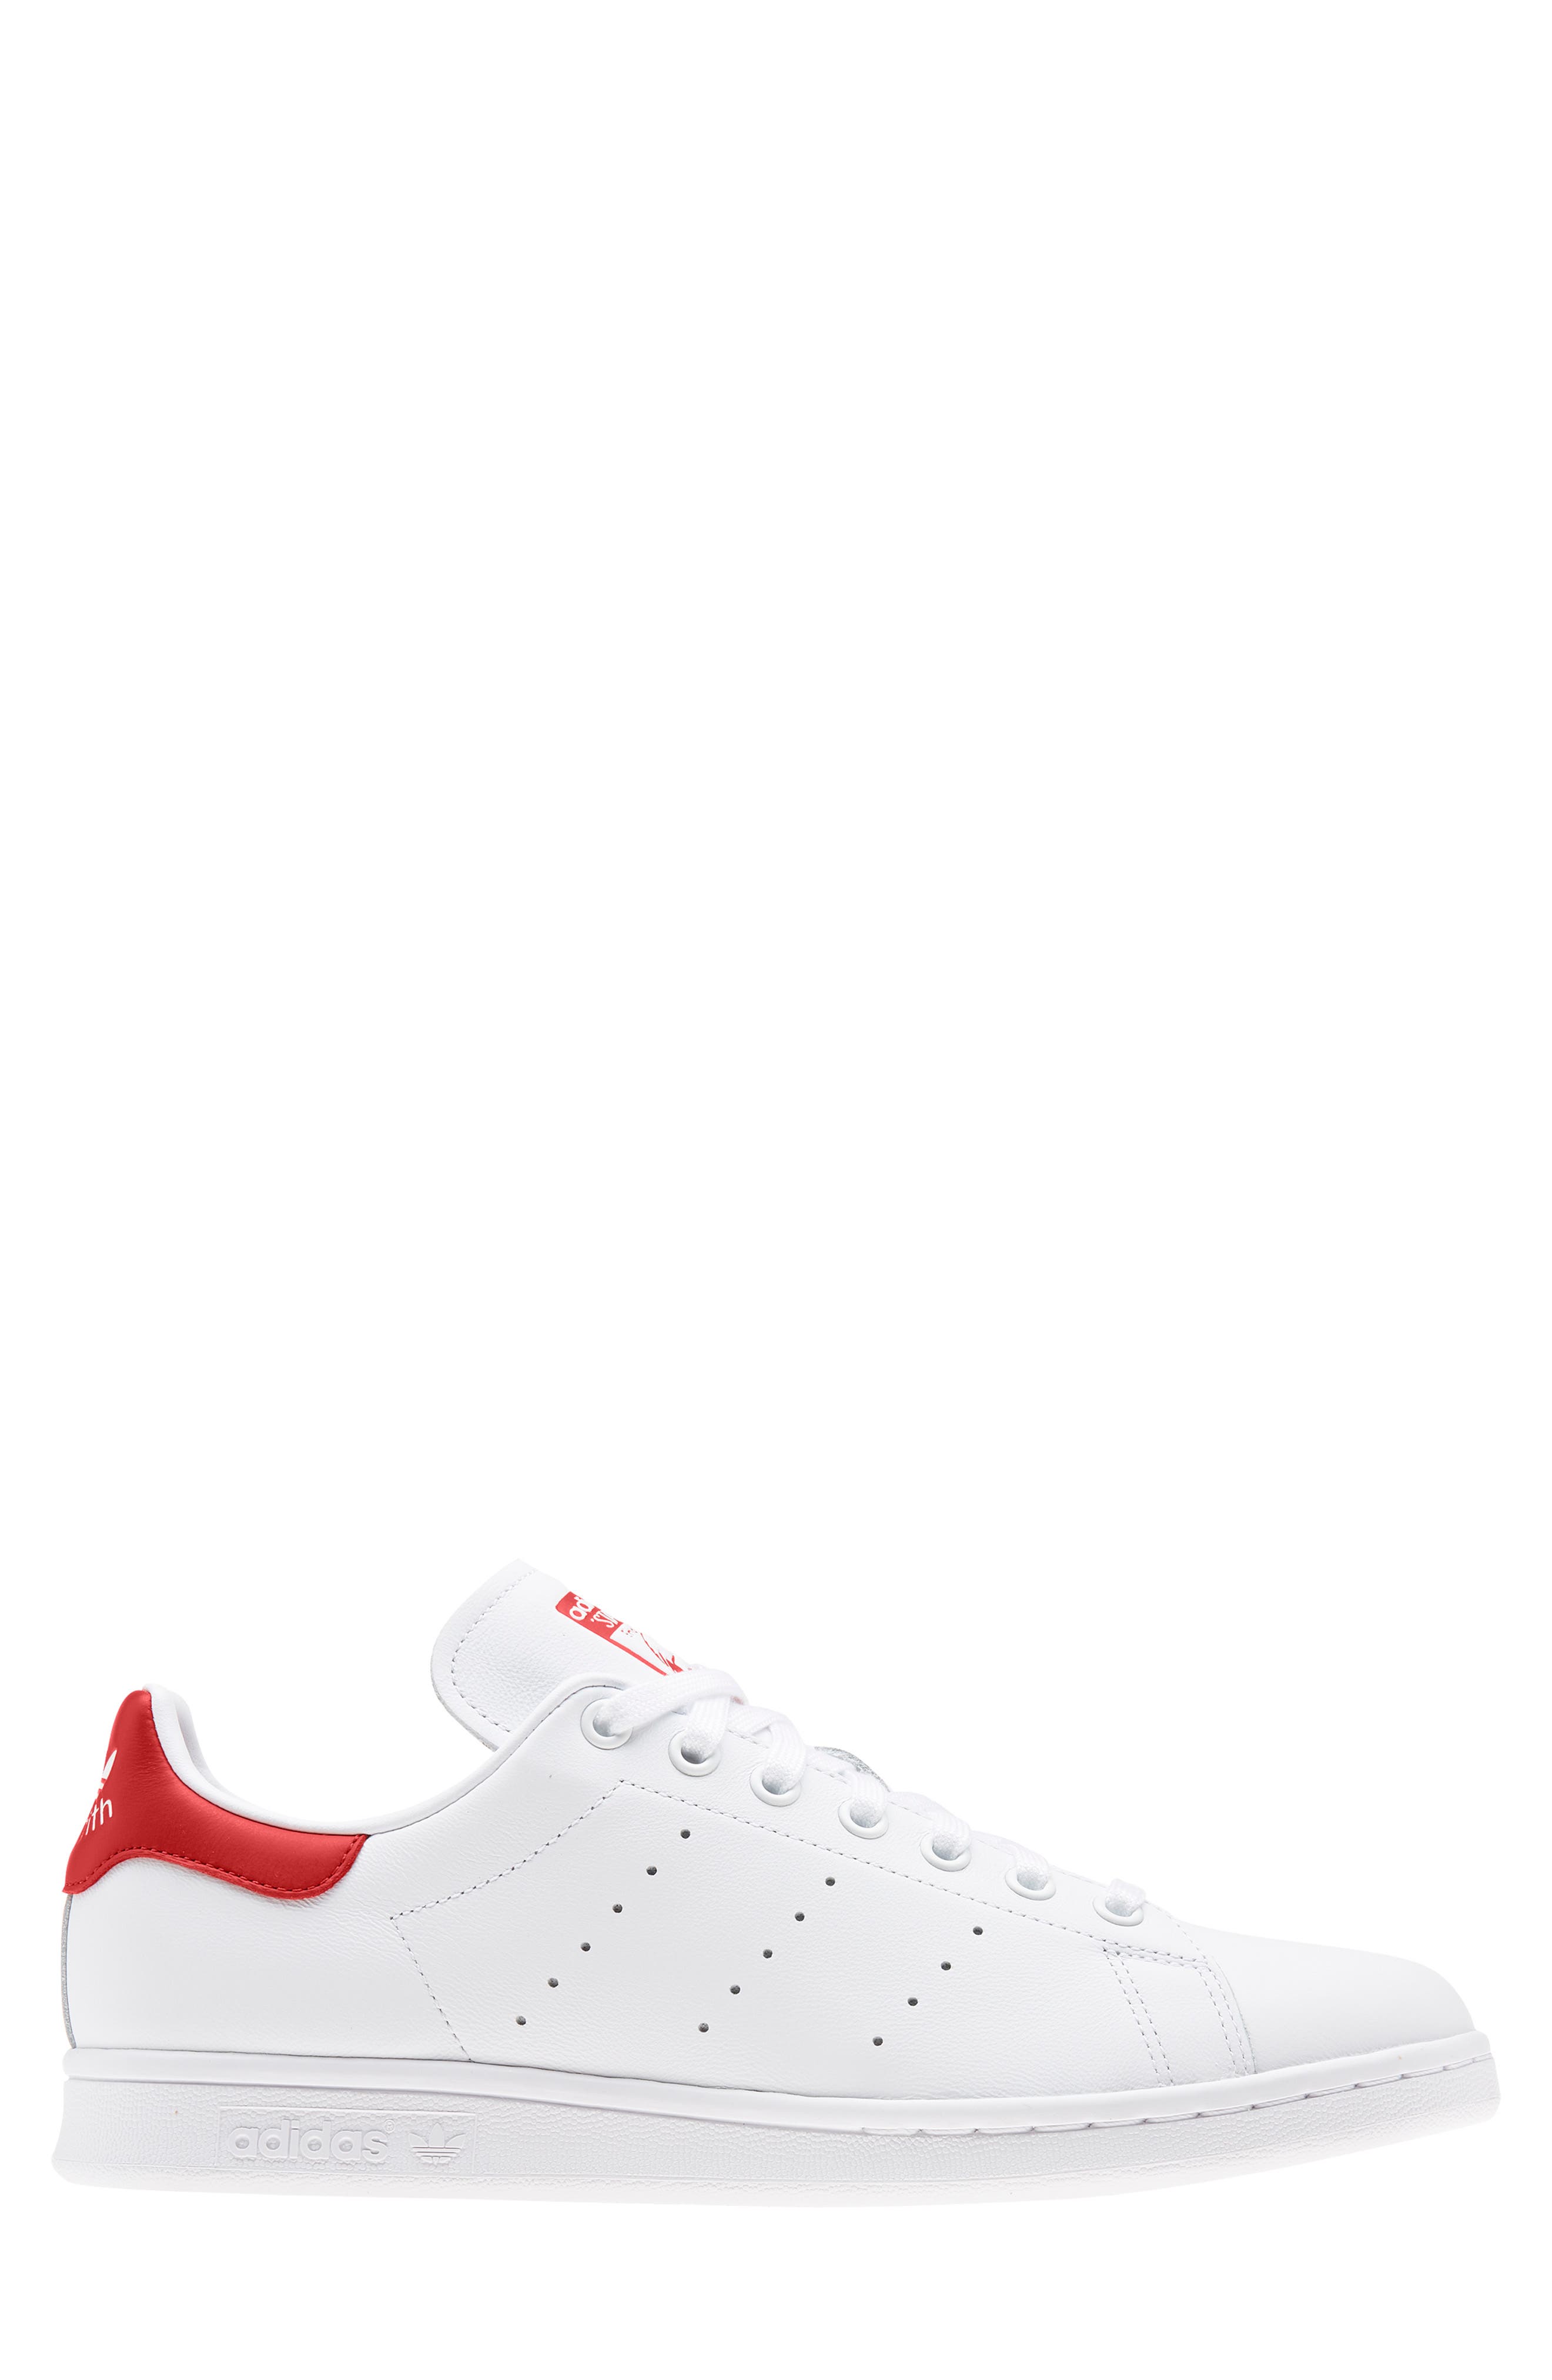 stan smith sneakers nordstrom